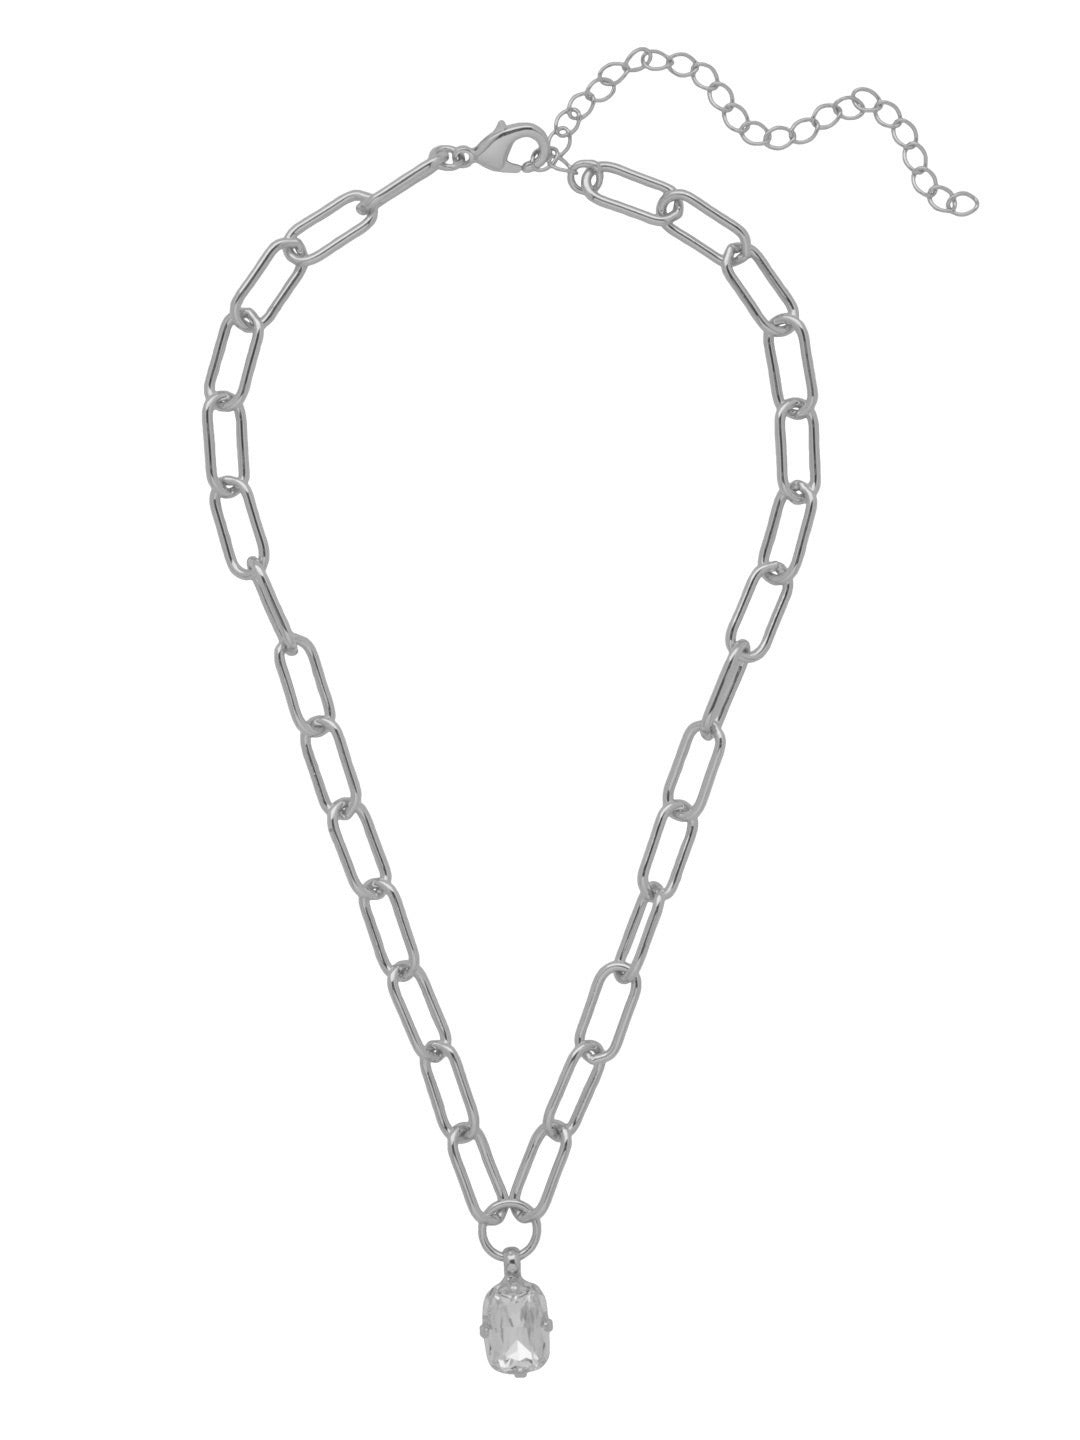 Nia Pendant Necklace - 4NFJ18PDCRY - <p>The Nia Pendant Necklace features a rounded octagon cut pendant on an adjustable large chunky paperclip chain, secured with a lobster claw clasp. From Sorrelli's Crystal collection in our Palladium finish.</p>